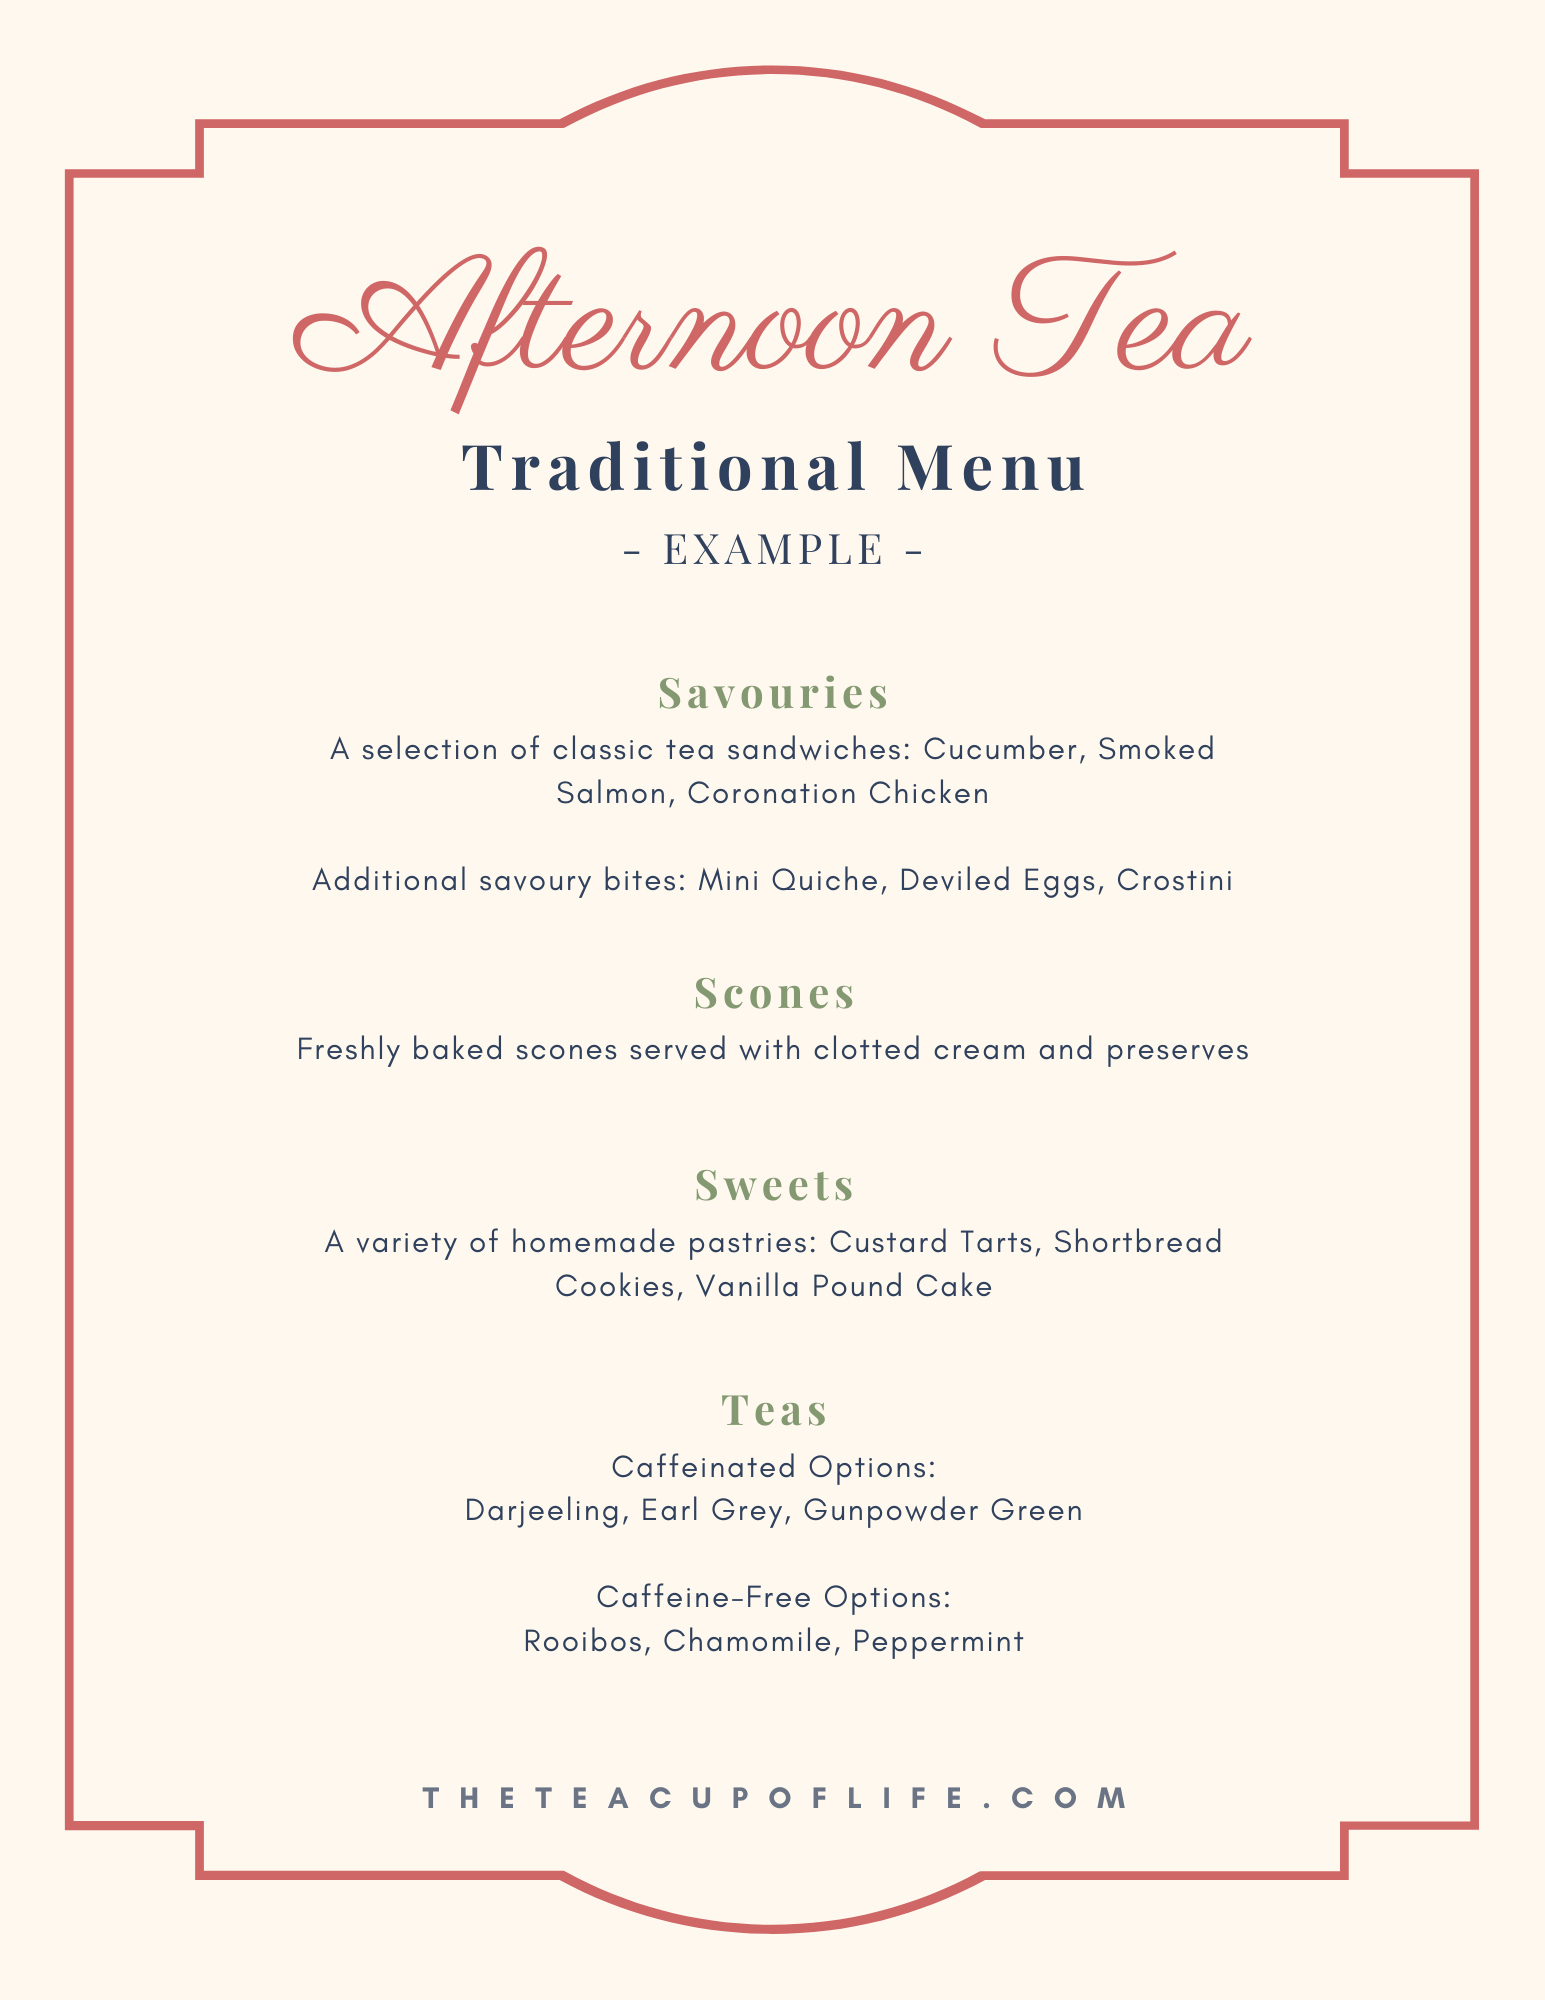 afternoon-tea-traditional-menu-example-the-cup-of-life